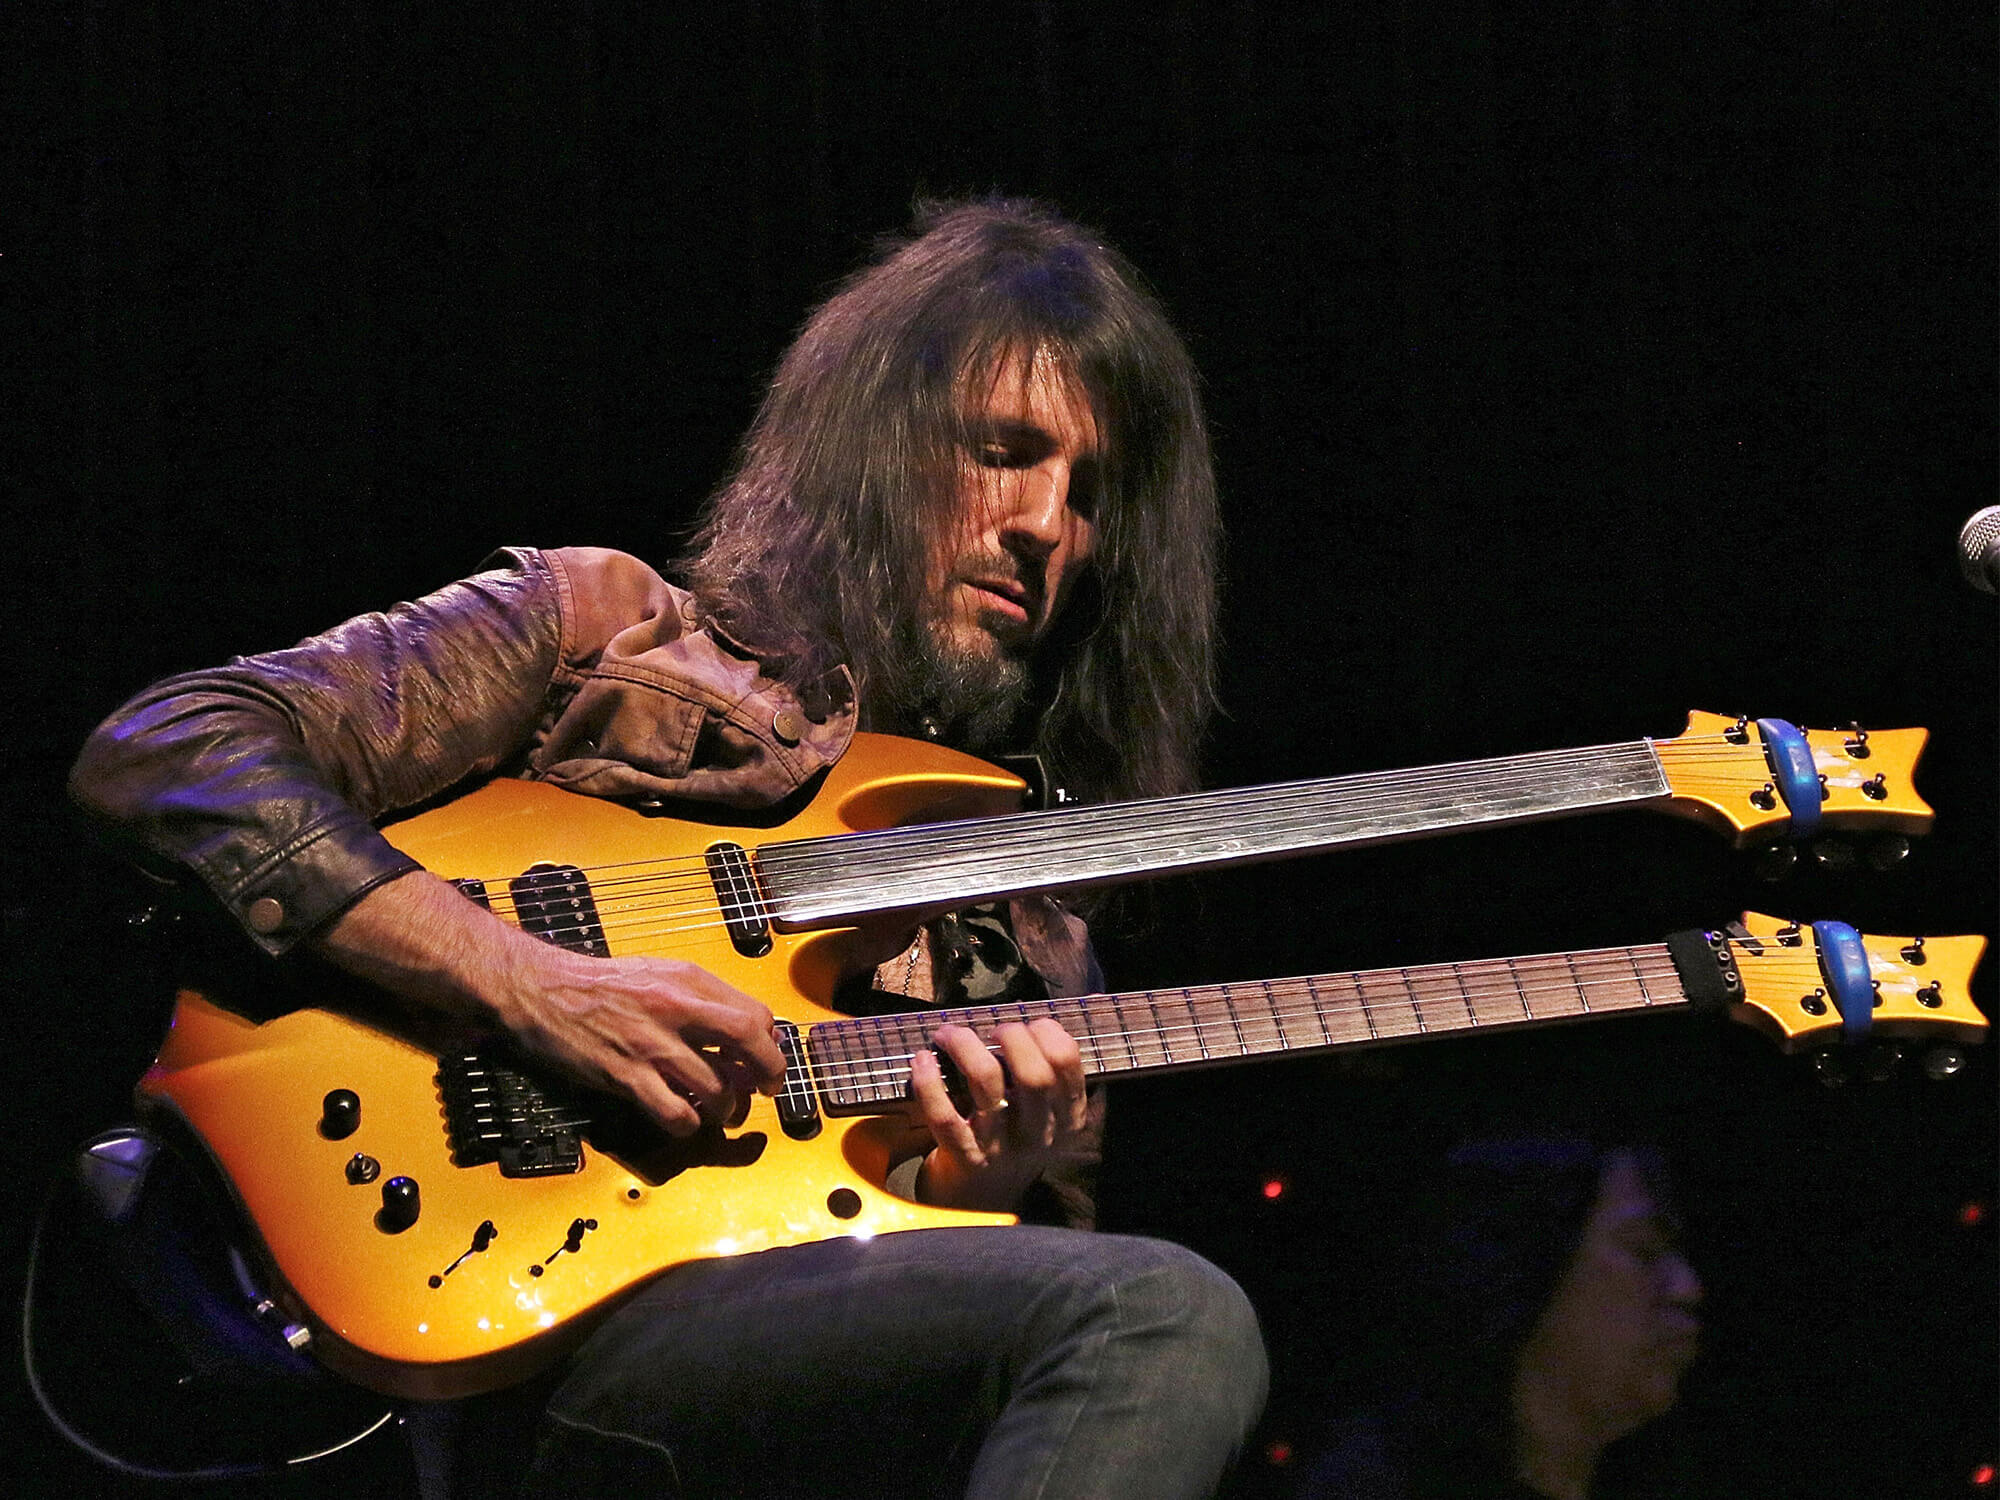 Bumblefoot playing a yellow double neck guitar. He has his fingers positioned high up on the frets of the lower guitar and is looking down as he is playing.